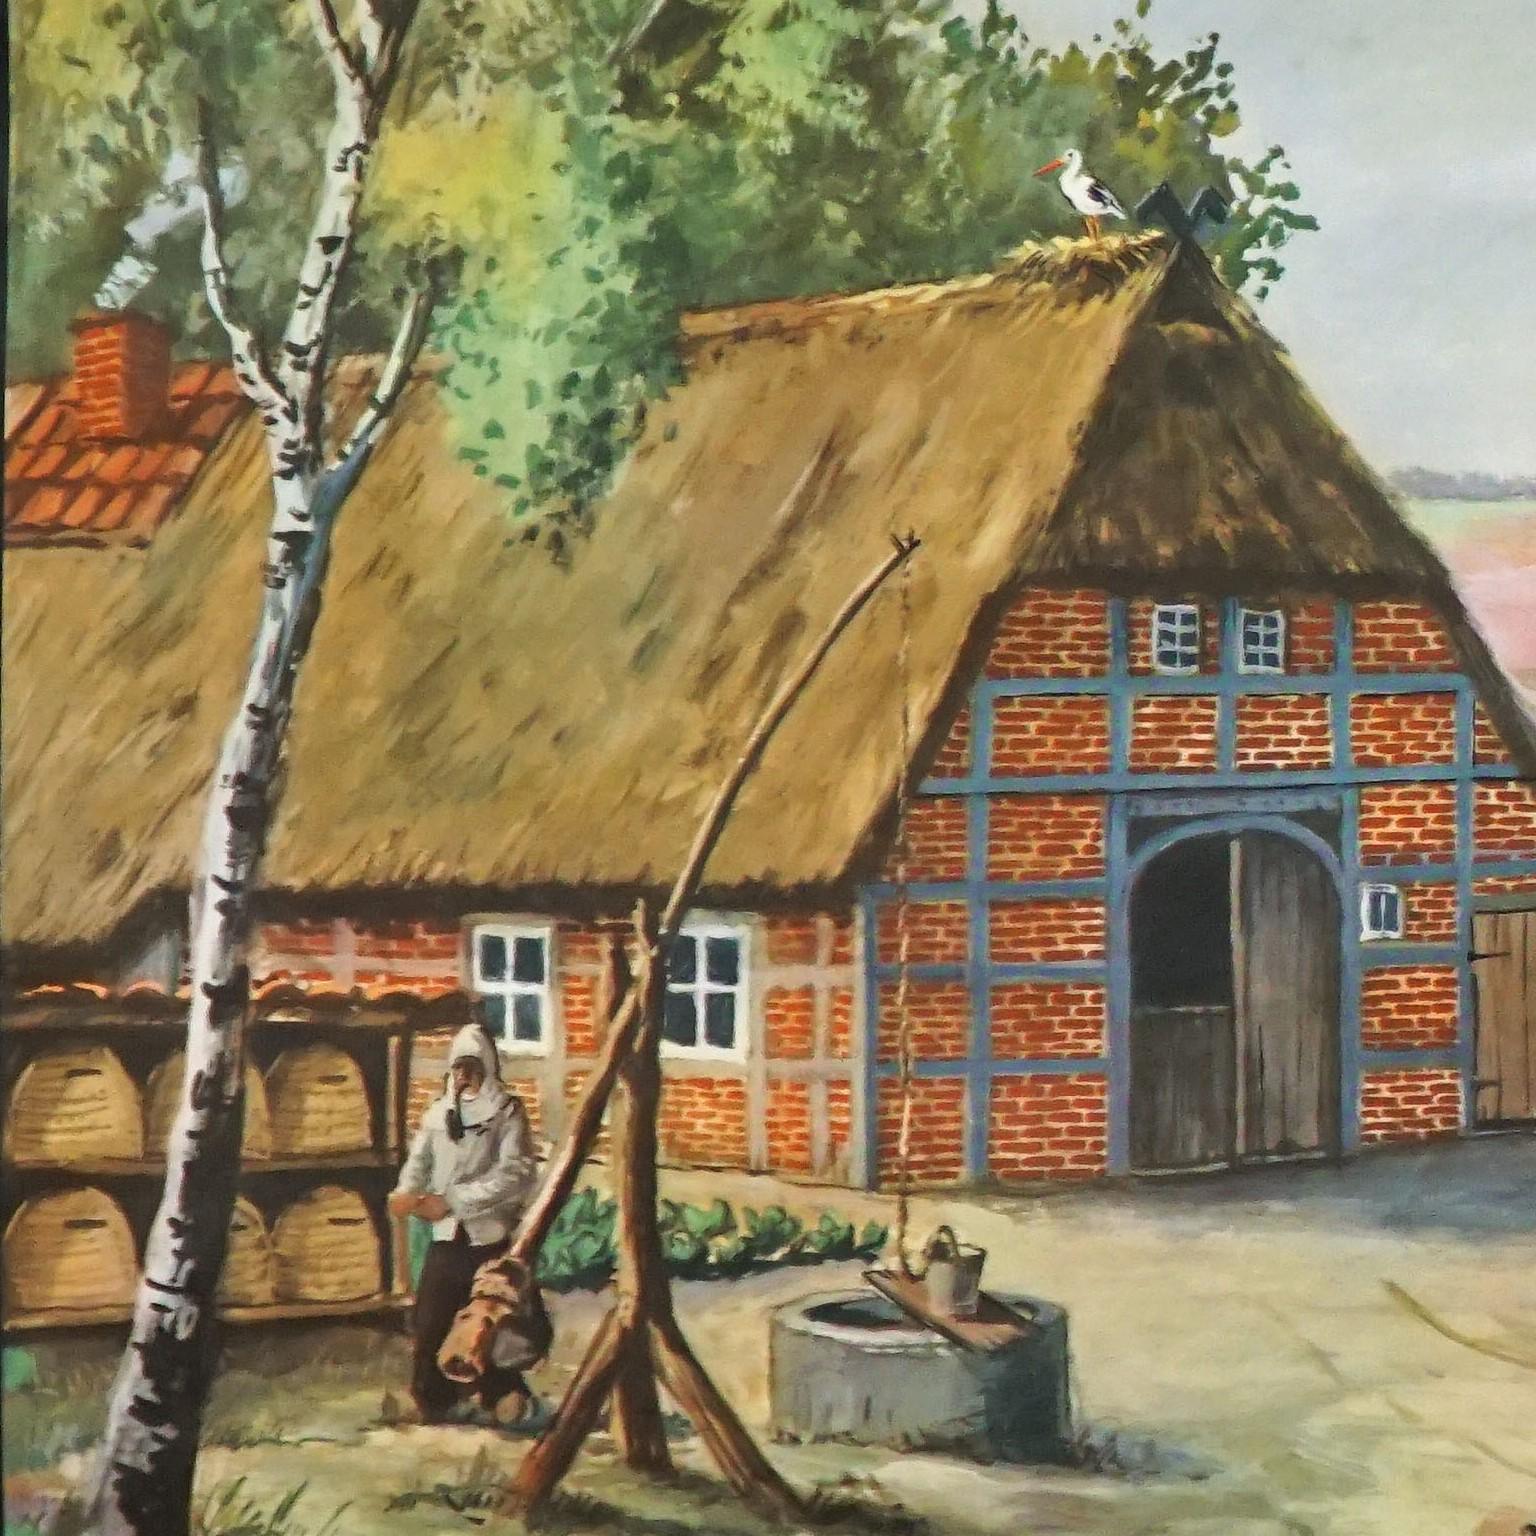 The cottagecore vintage pull-down wall chart illustrates the marvellous landscape of the Lueneburg Heathlands (a unique region in the Northern part of Germany) with a typical farmhouse, beehives with beekeeper, a sheppard with his flock of sheep and